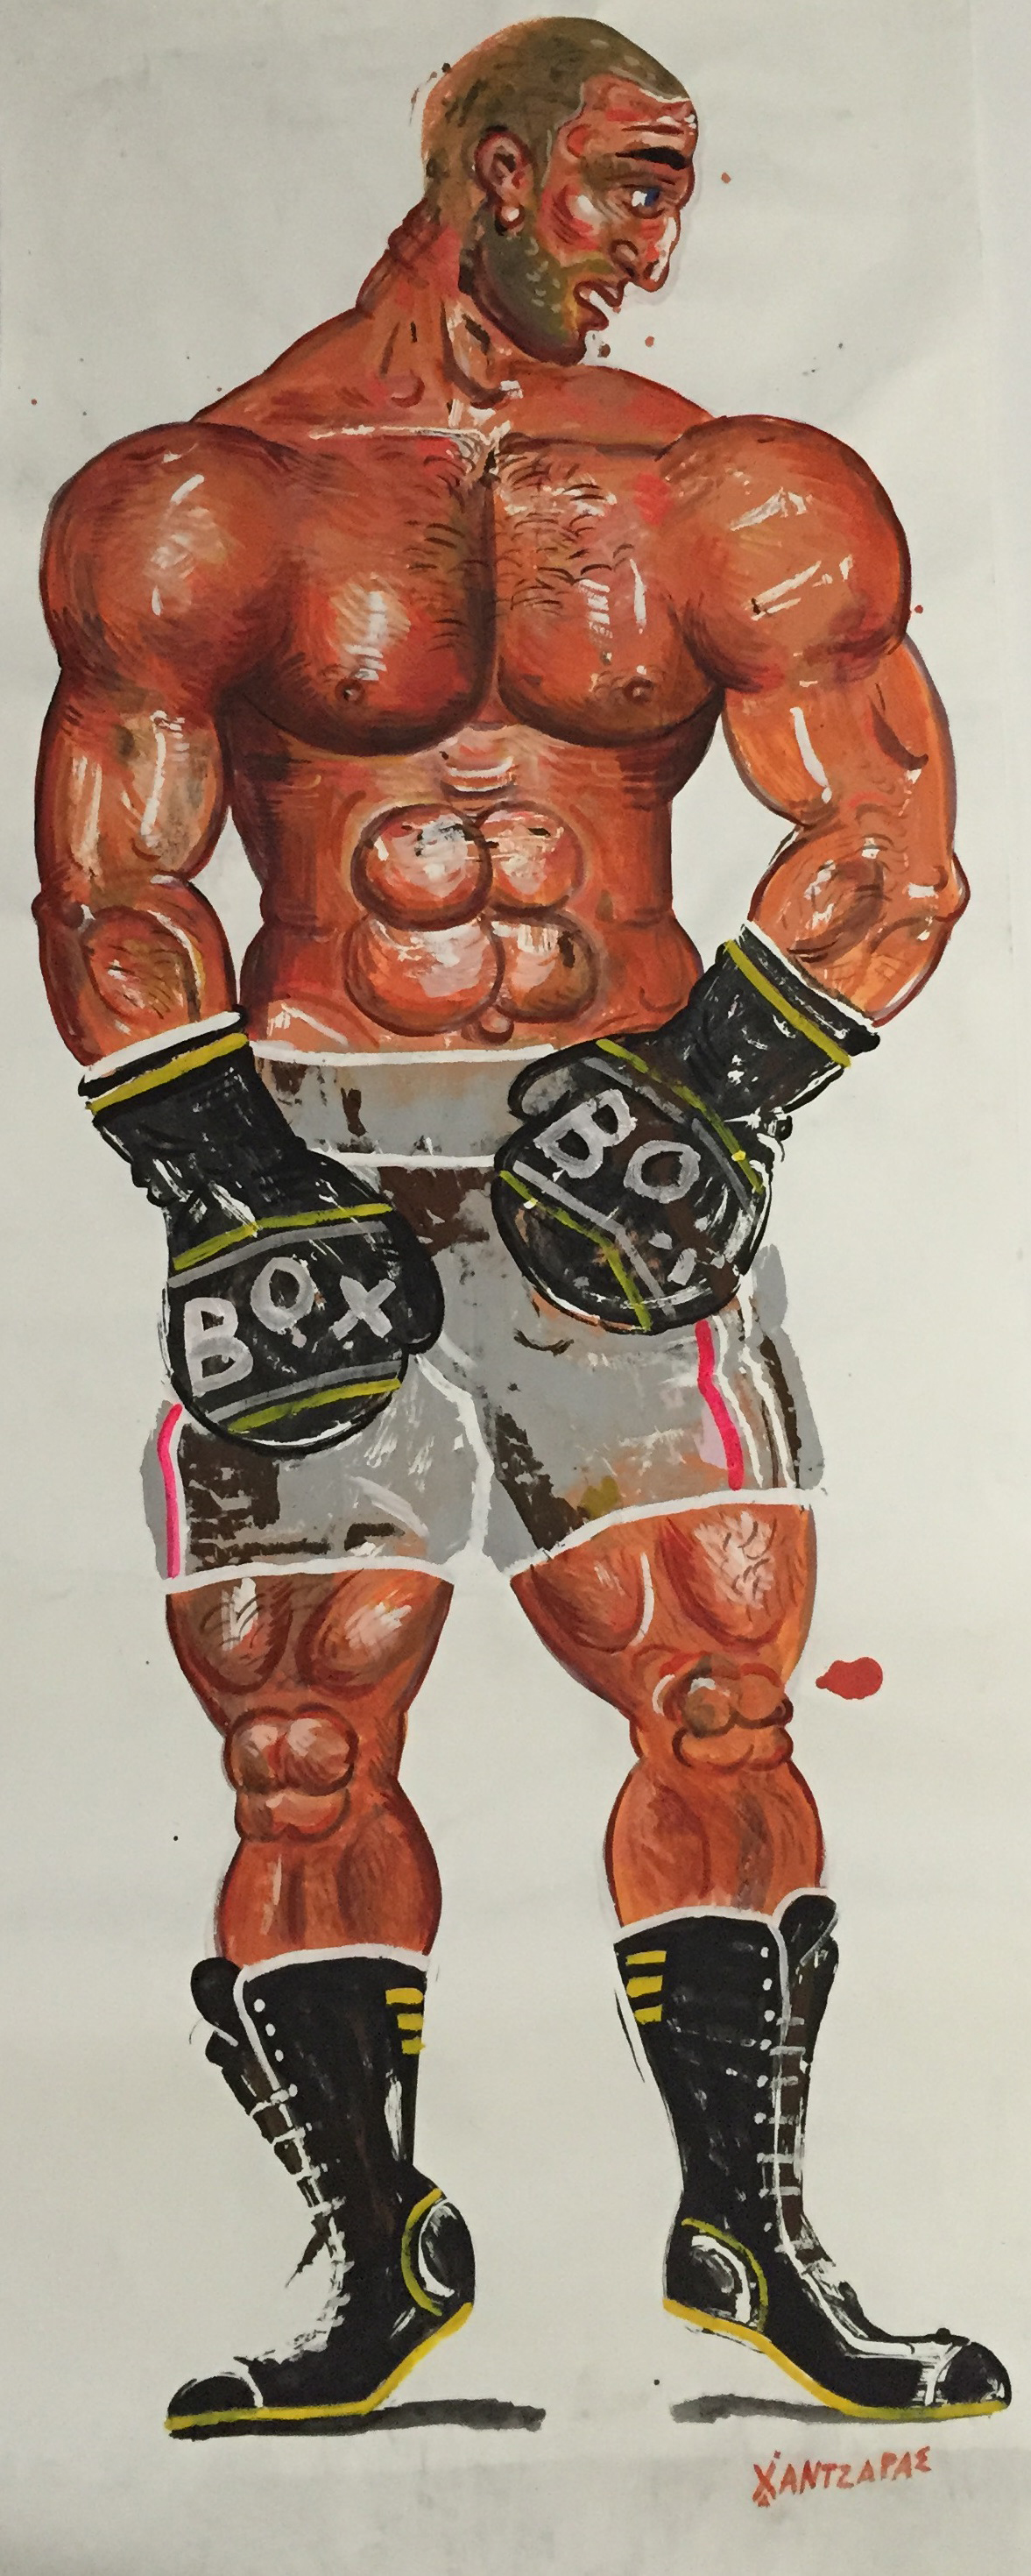  Boxer #1 Acrylic on paper Approx size of artwork: 31” x 83” / 80 x 210 cm 